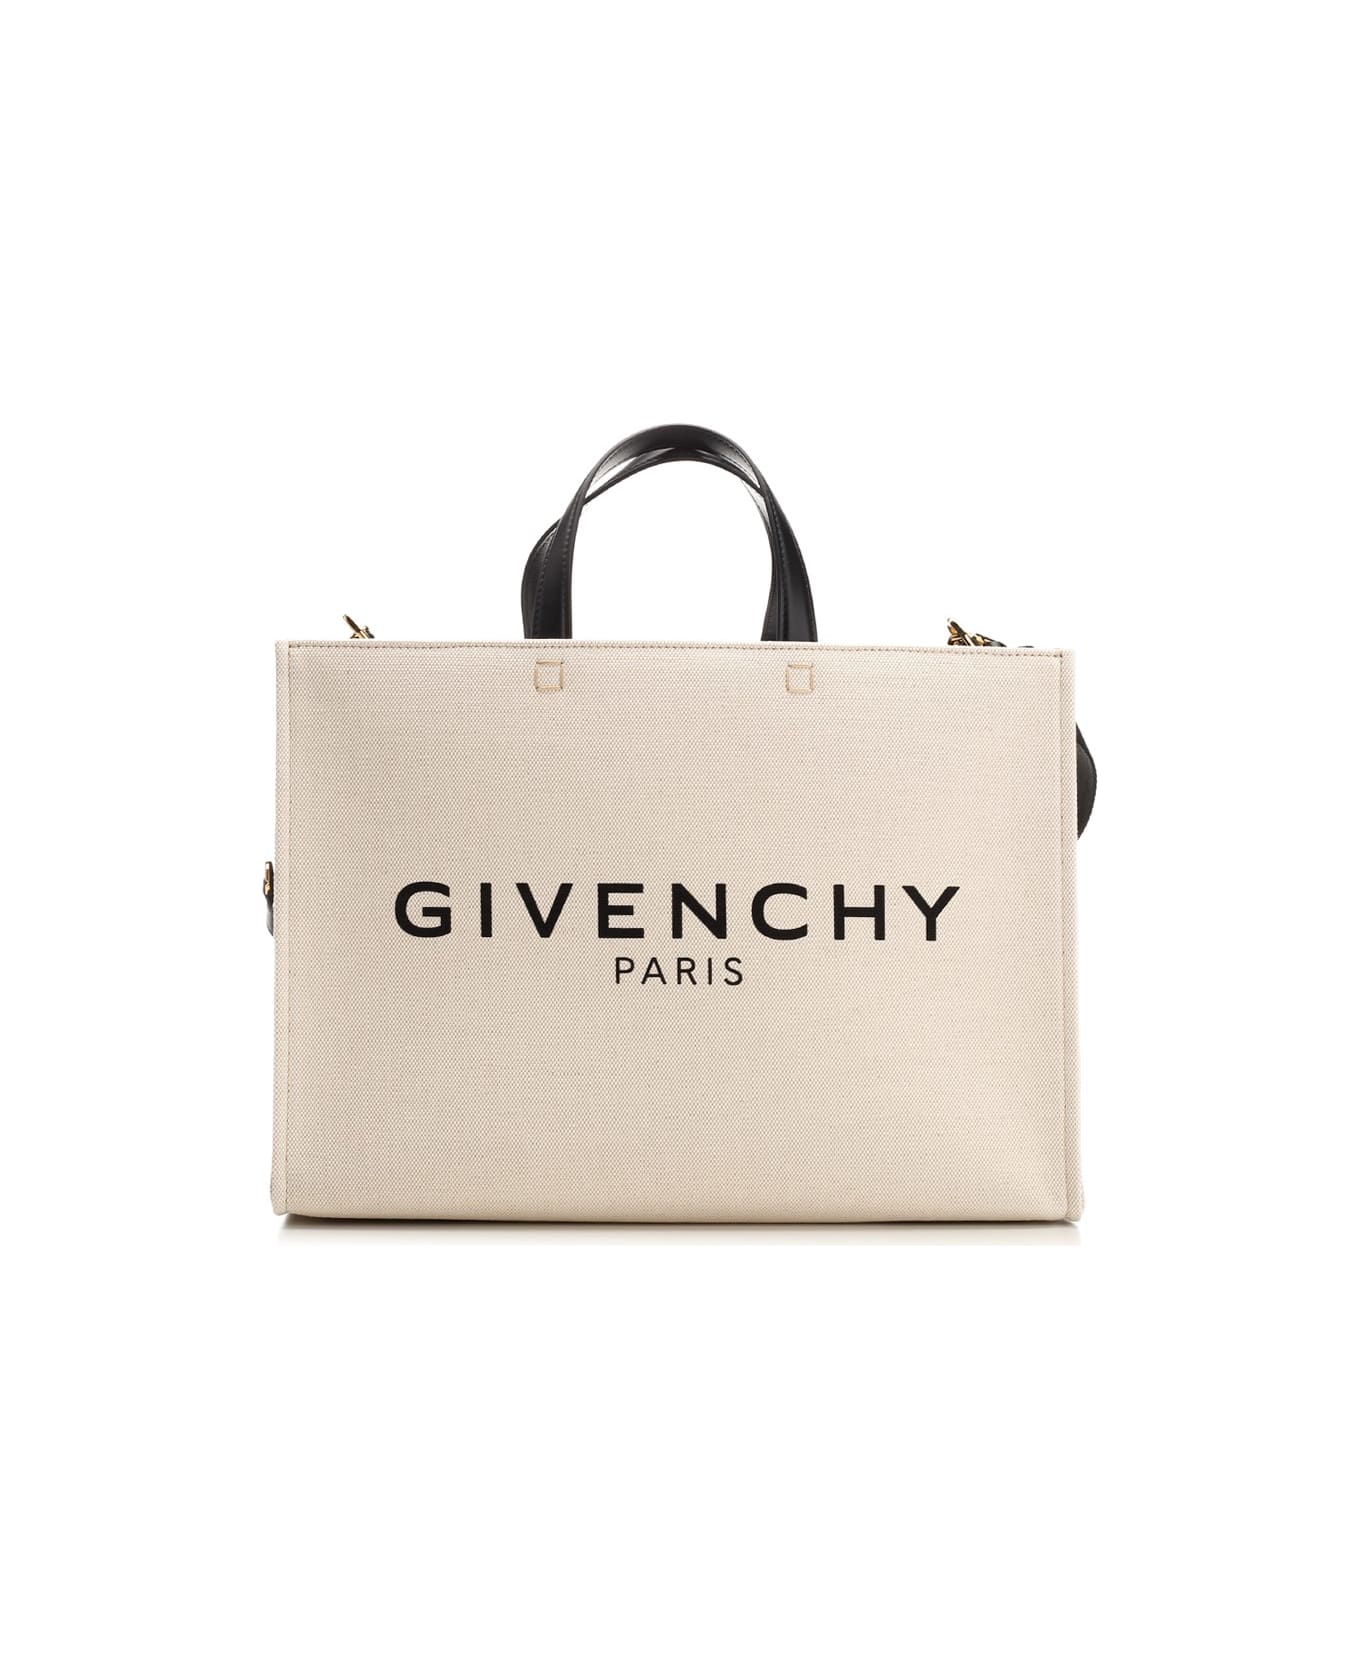 Givenchy G Tote Bag - White トートバッグ